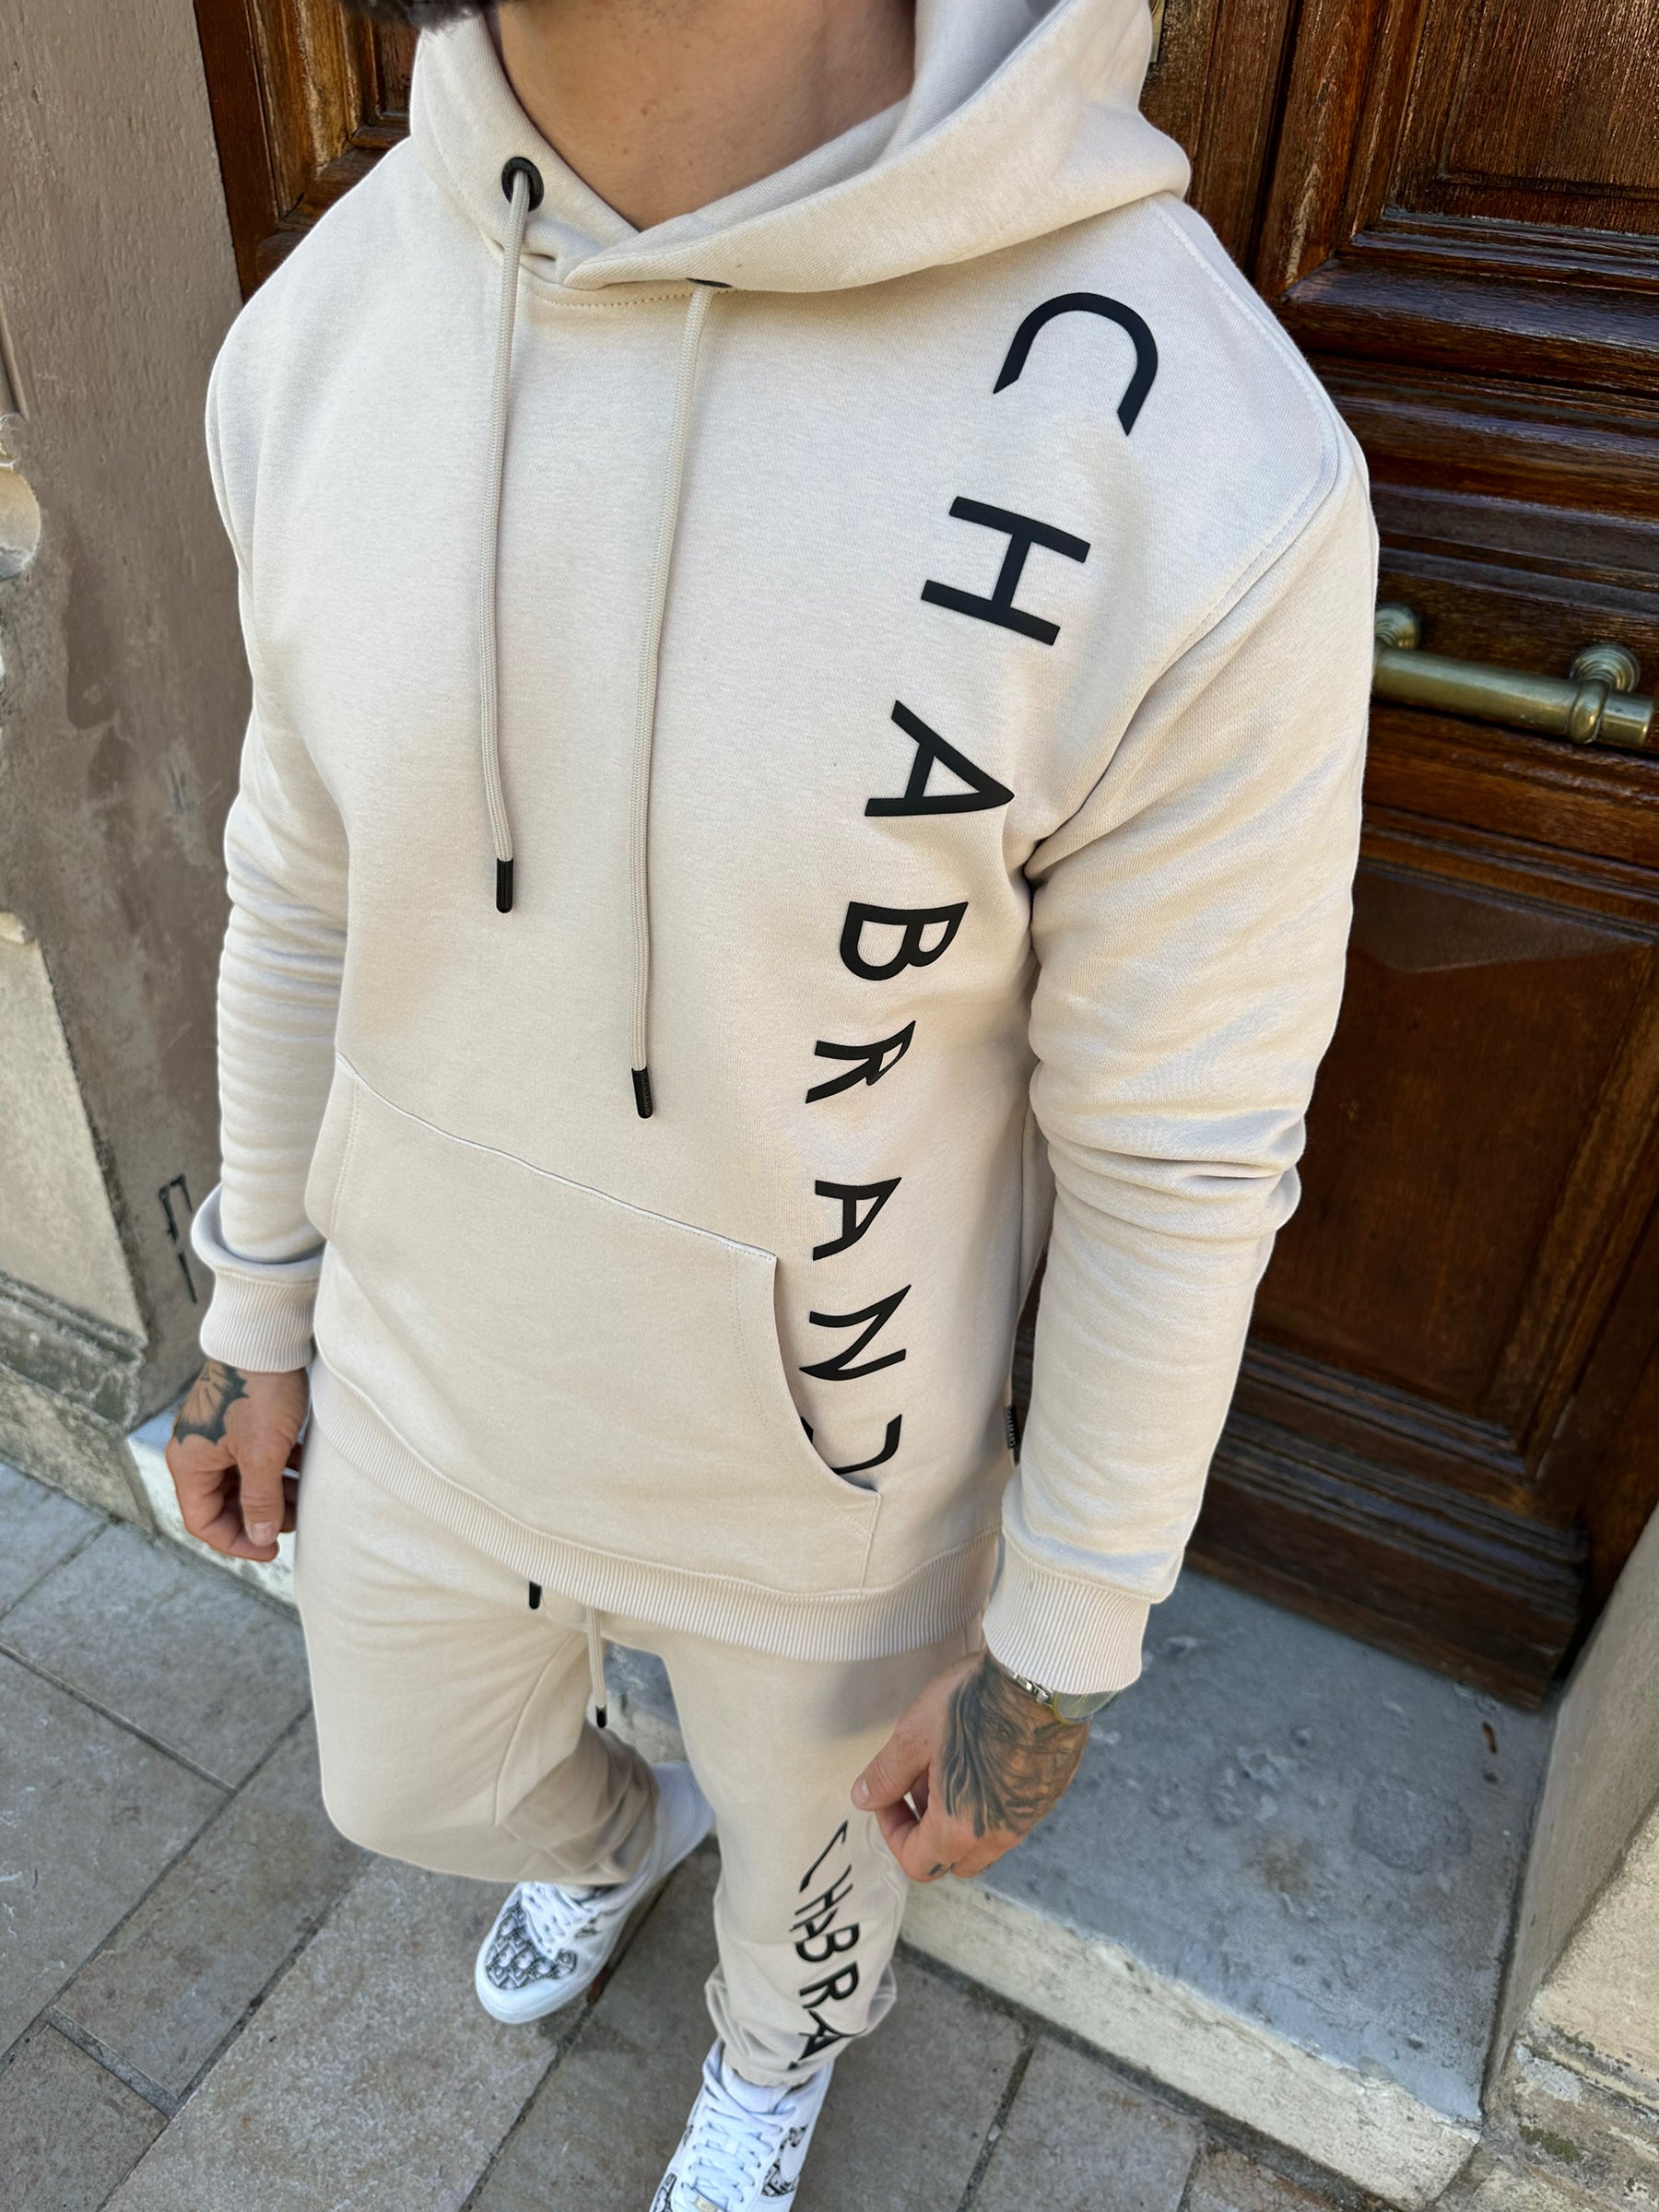 CHABRAND - Gray jogging pants with black sign